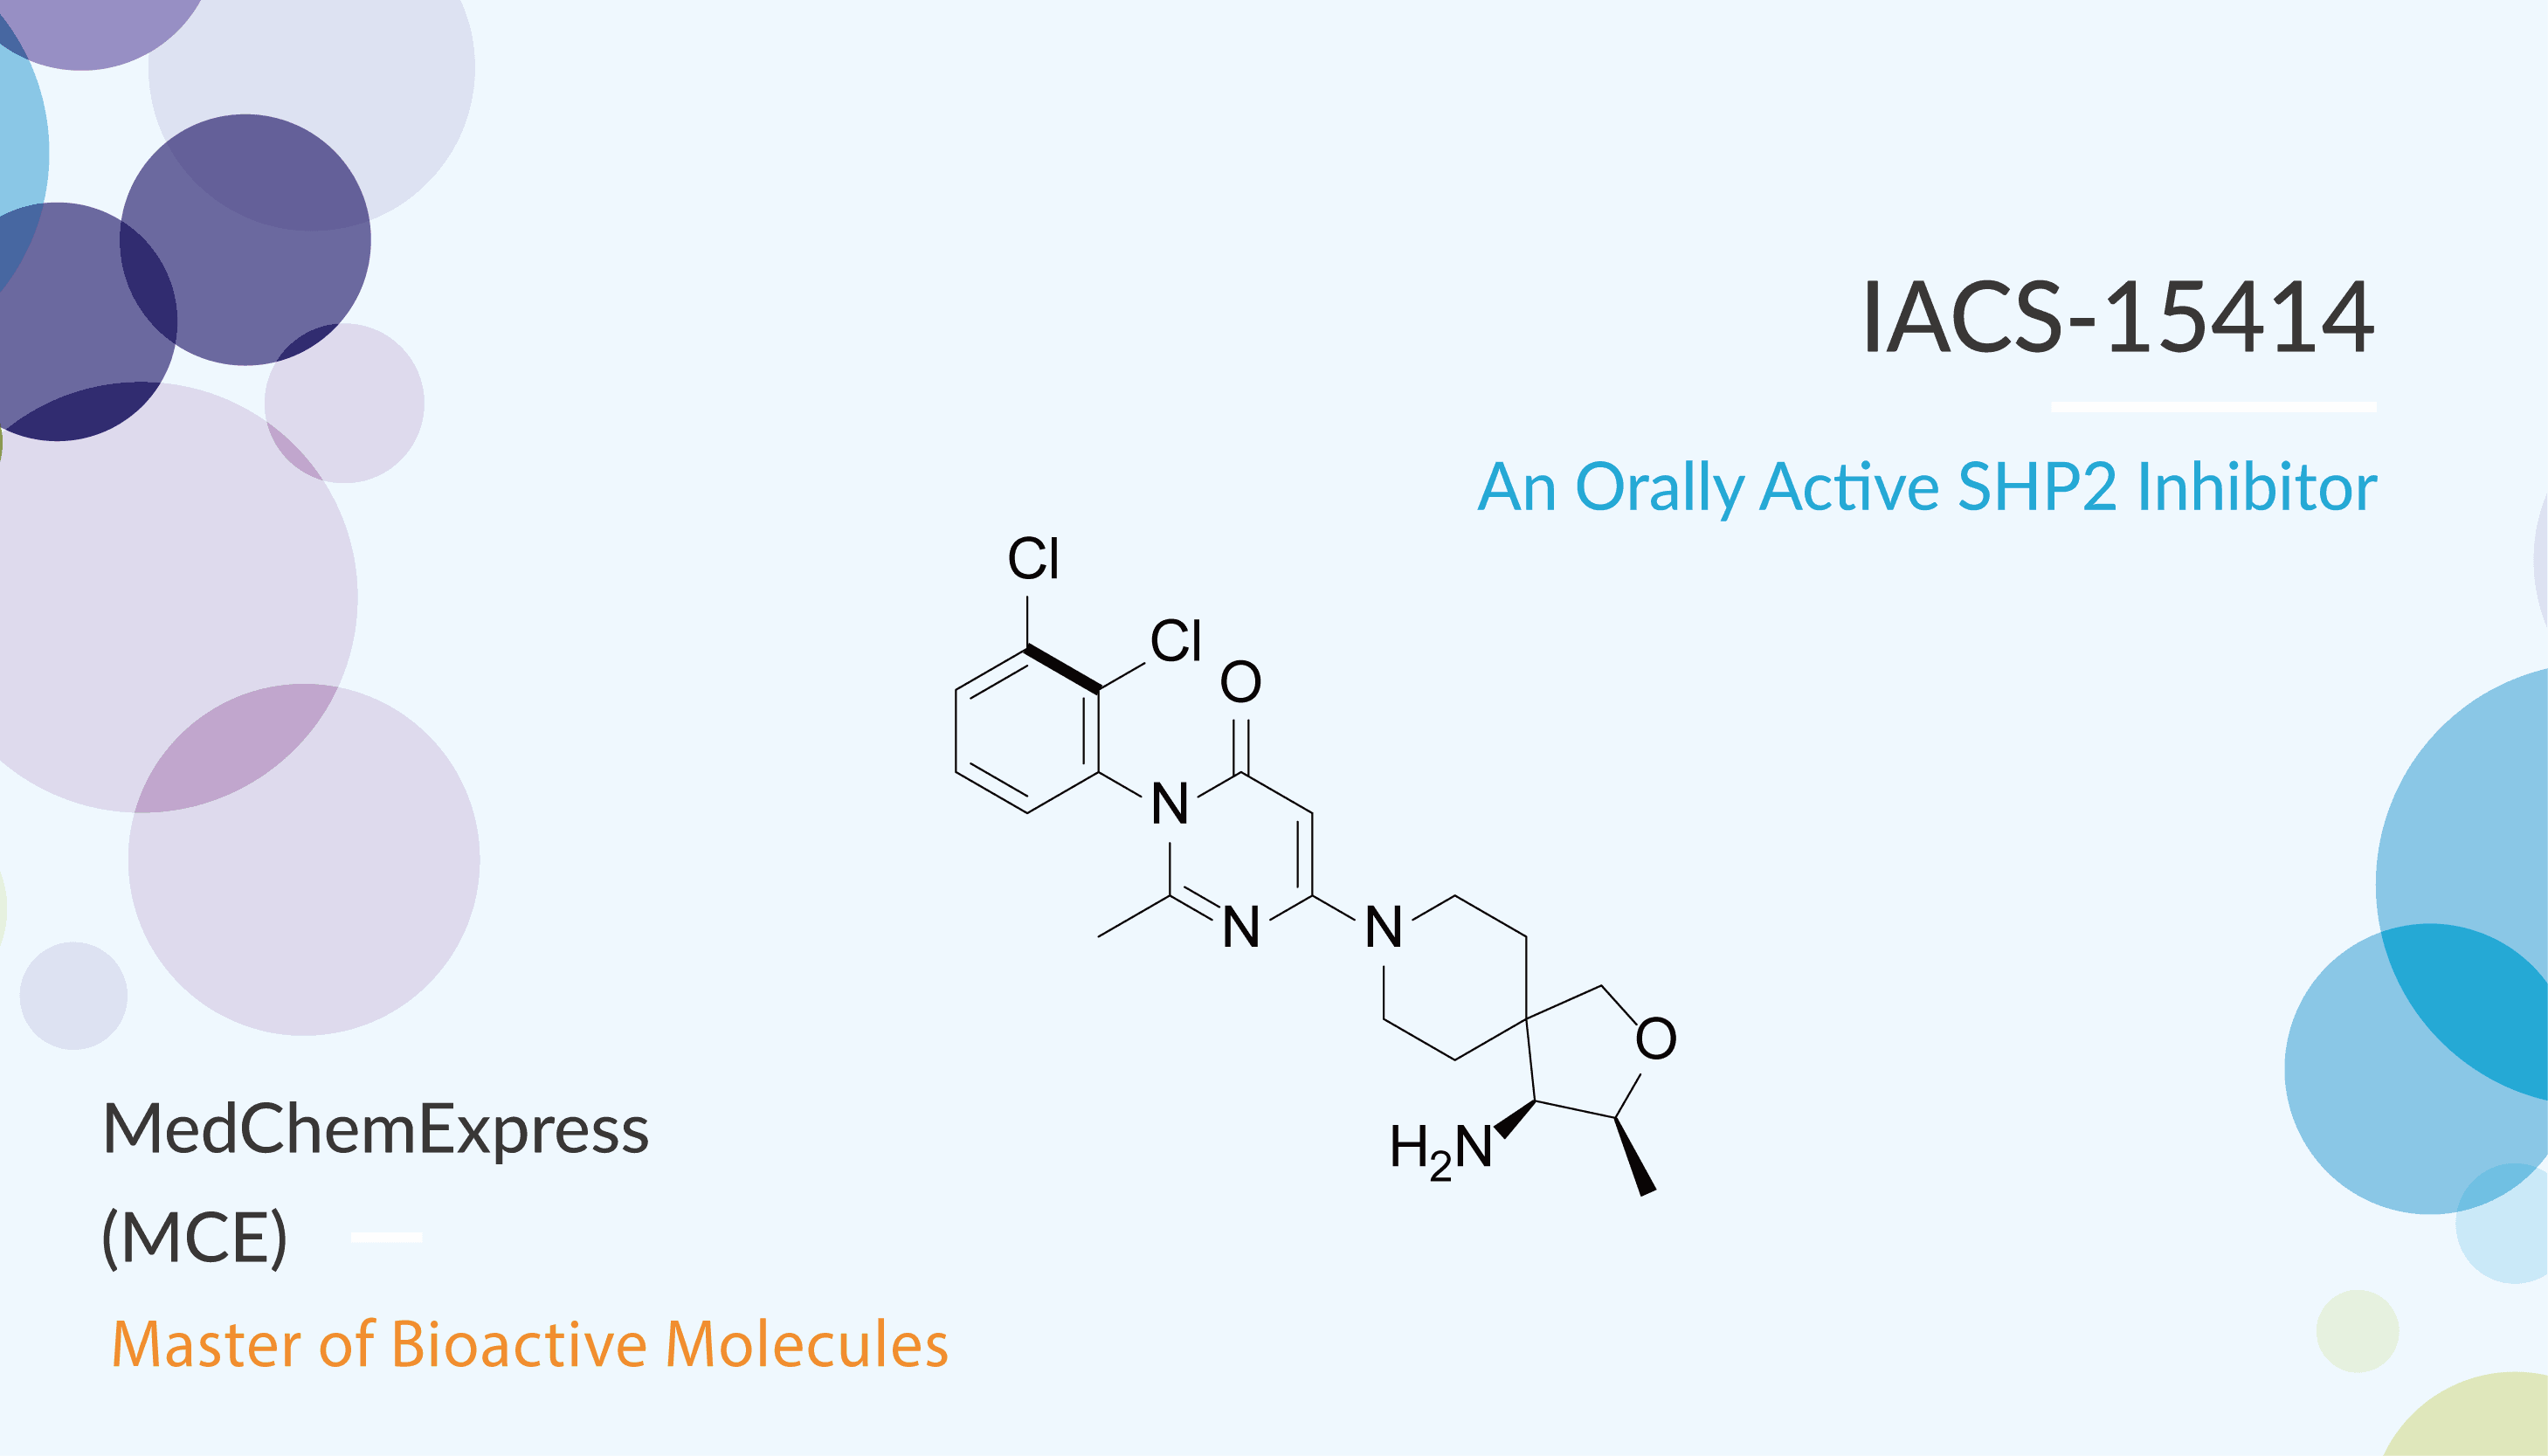 IACS-15414 is an Orally Active SHP2 Inhibitor